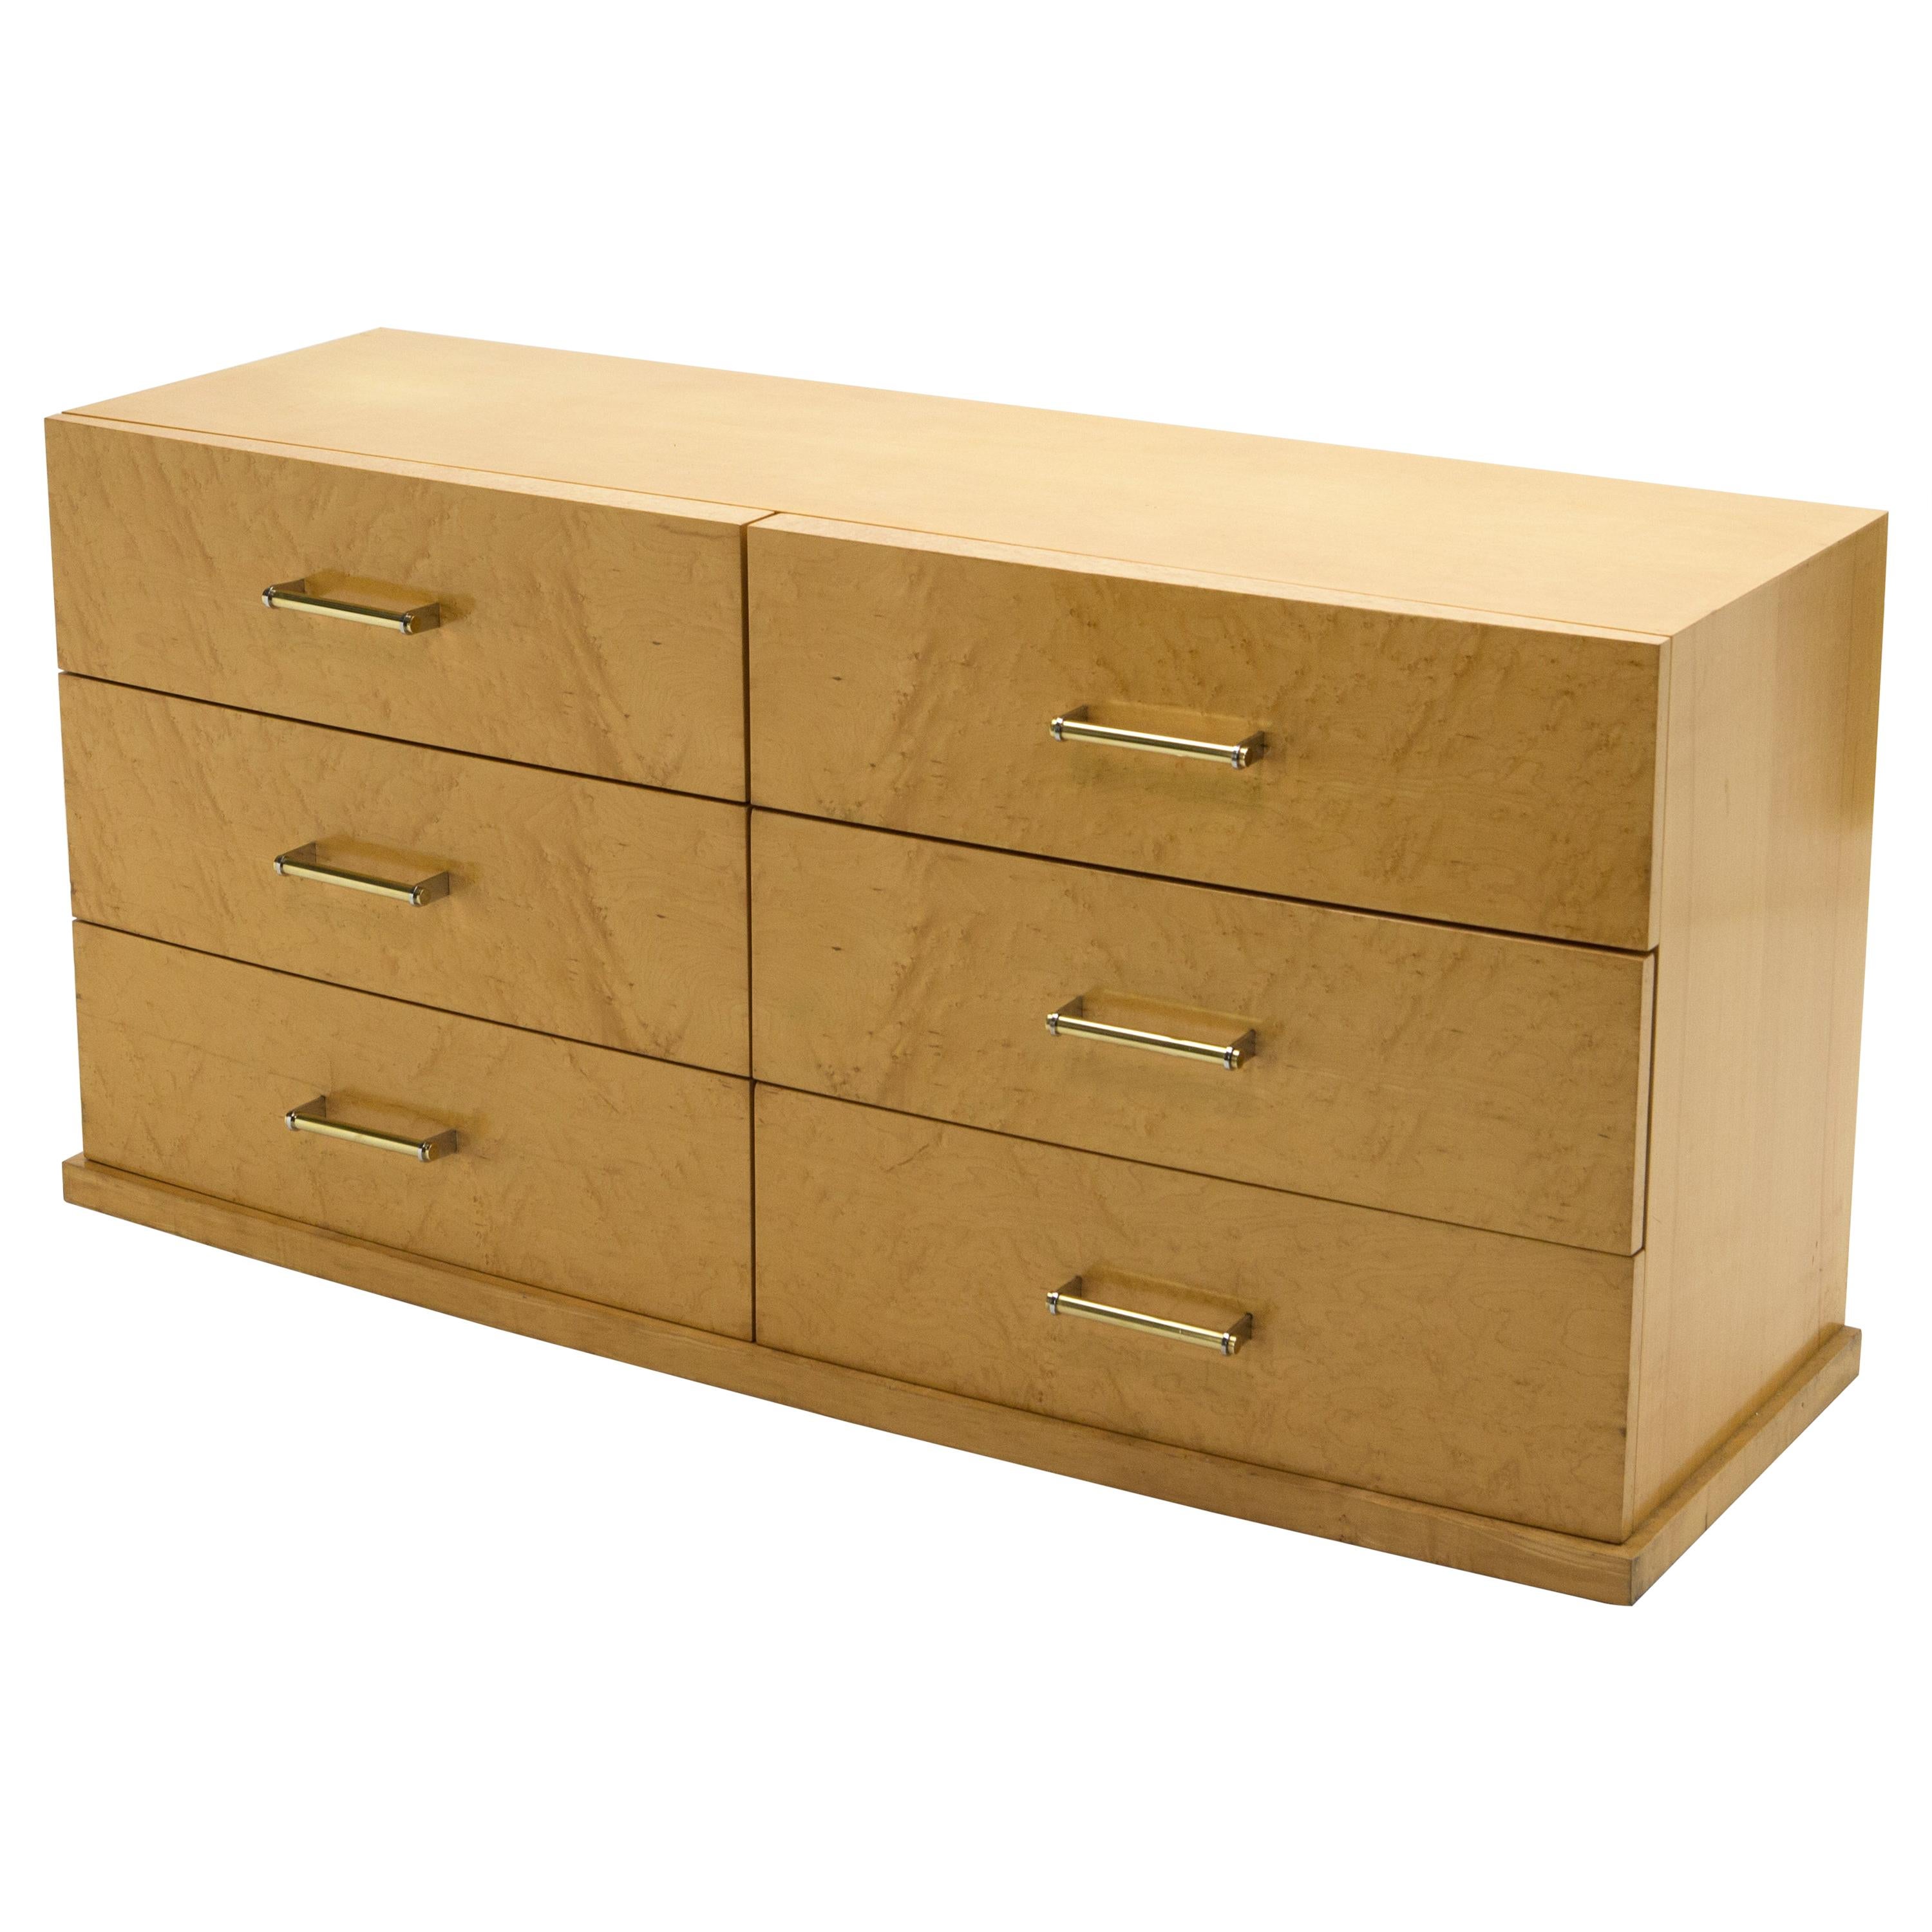 This large 1950s commode chest of drawers would impart a cosy, glowing mood to any space. The warm sycamore wood, geometric shape and curved front, remains looking healthy and smooth 70 years later. Quality brass and chrome handles adorn the front